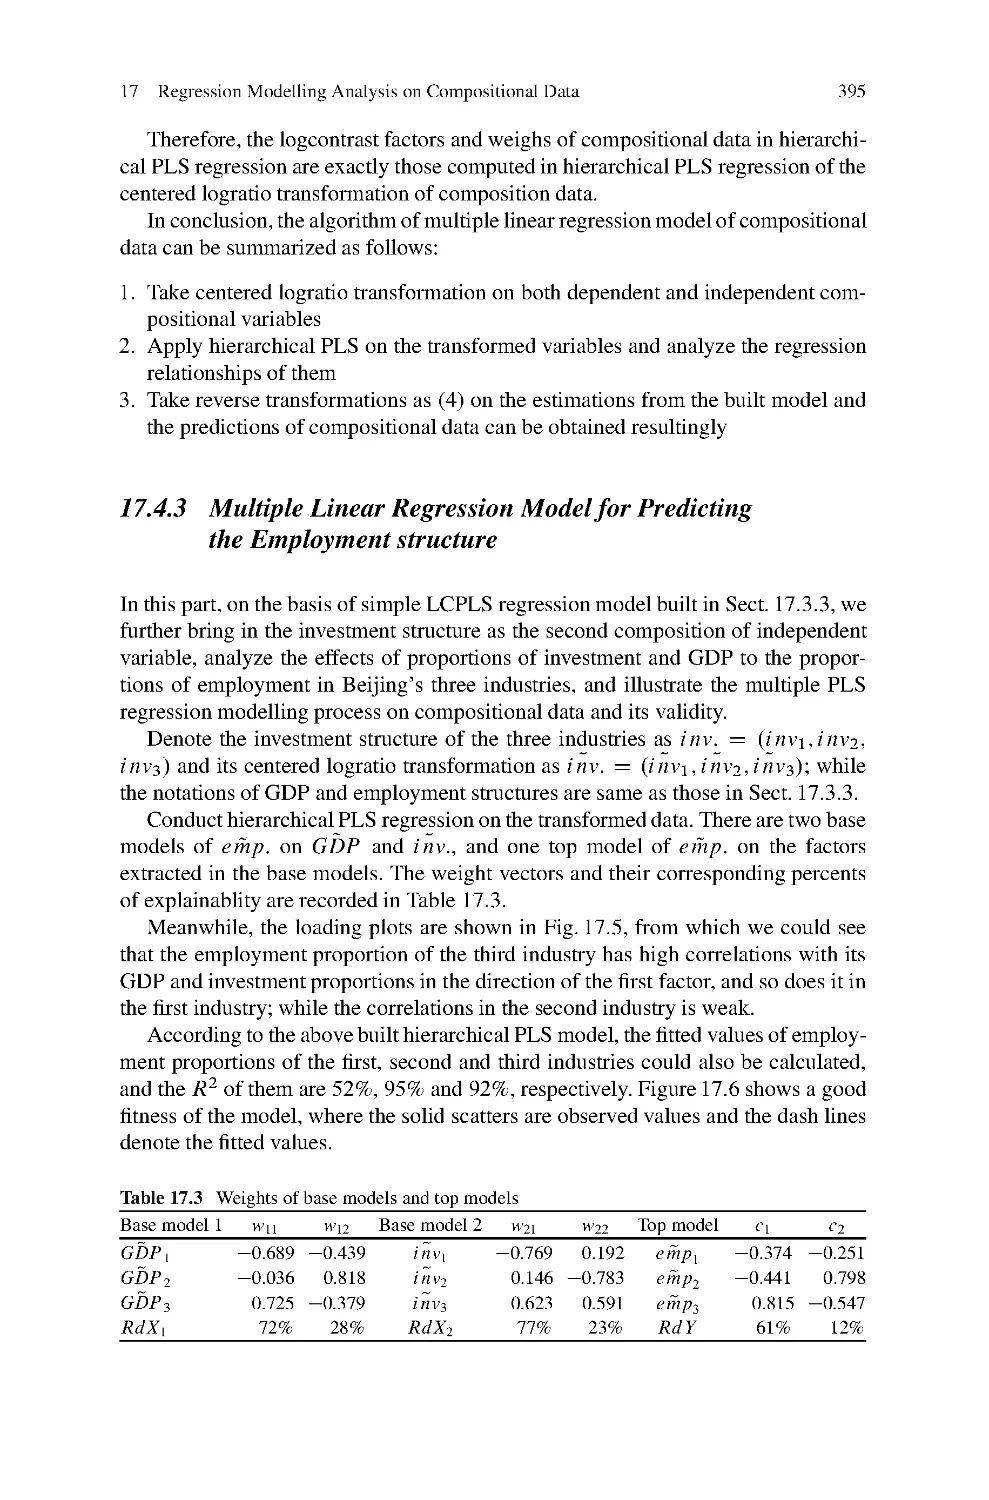 17.4.3 Multiple Linear Regression Model for Predictingthe Employment structure